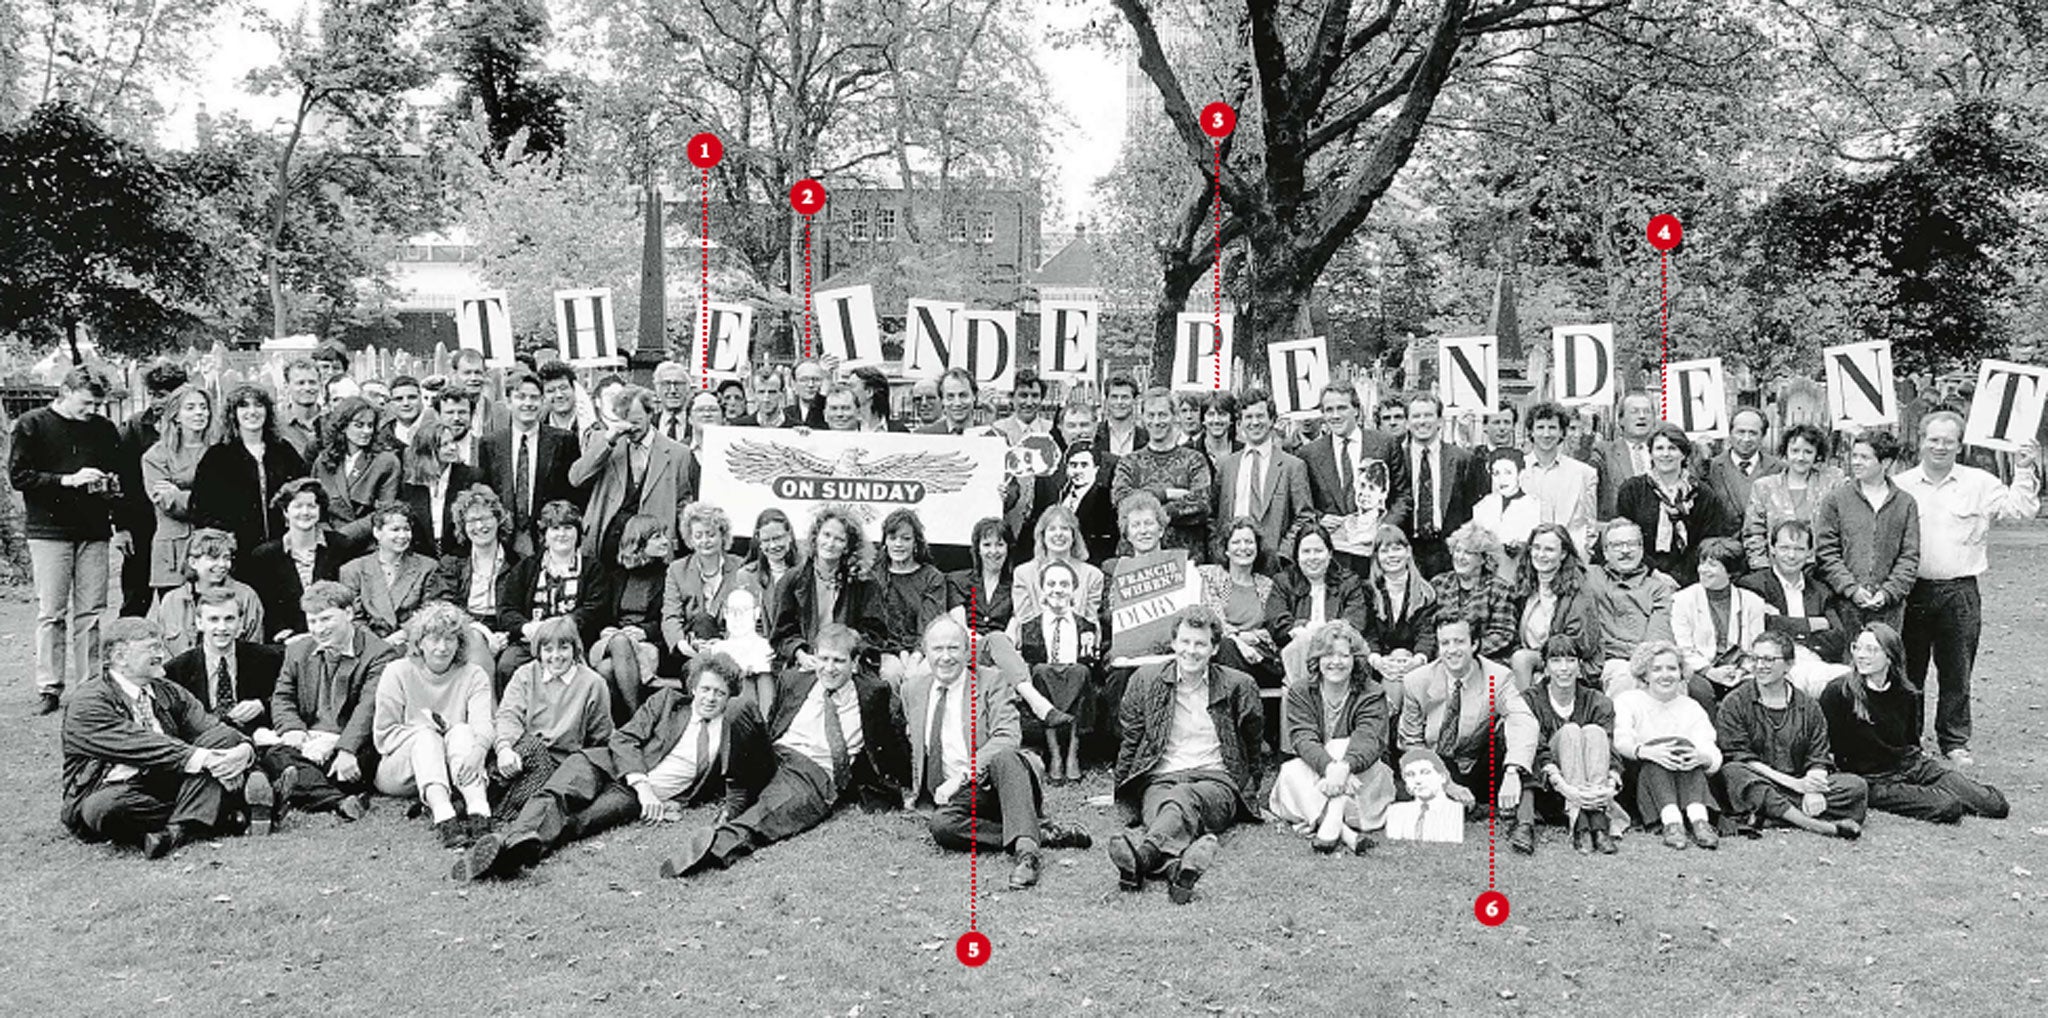 The staff of the Independent on Sunday pictured in 1990